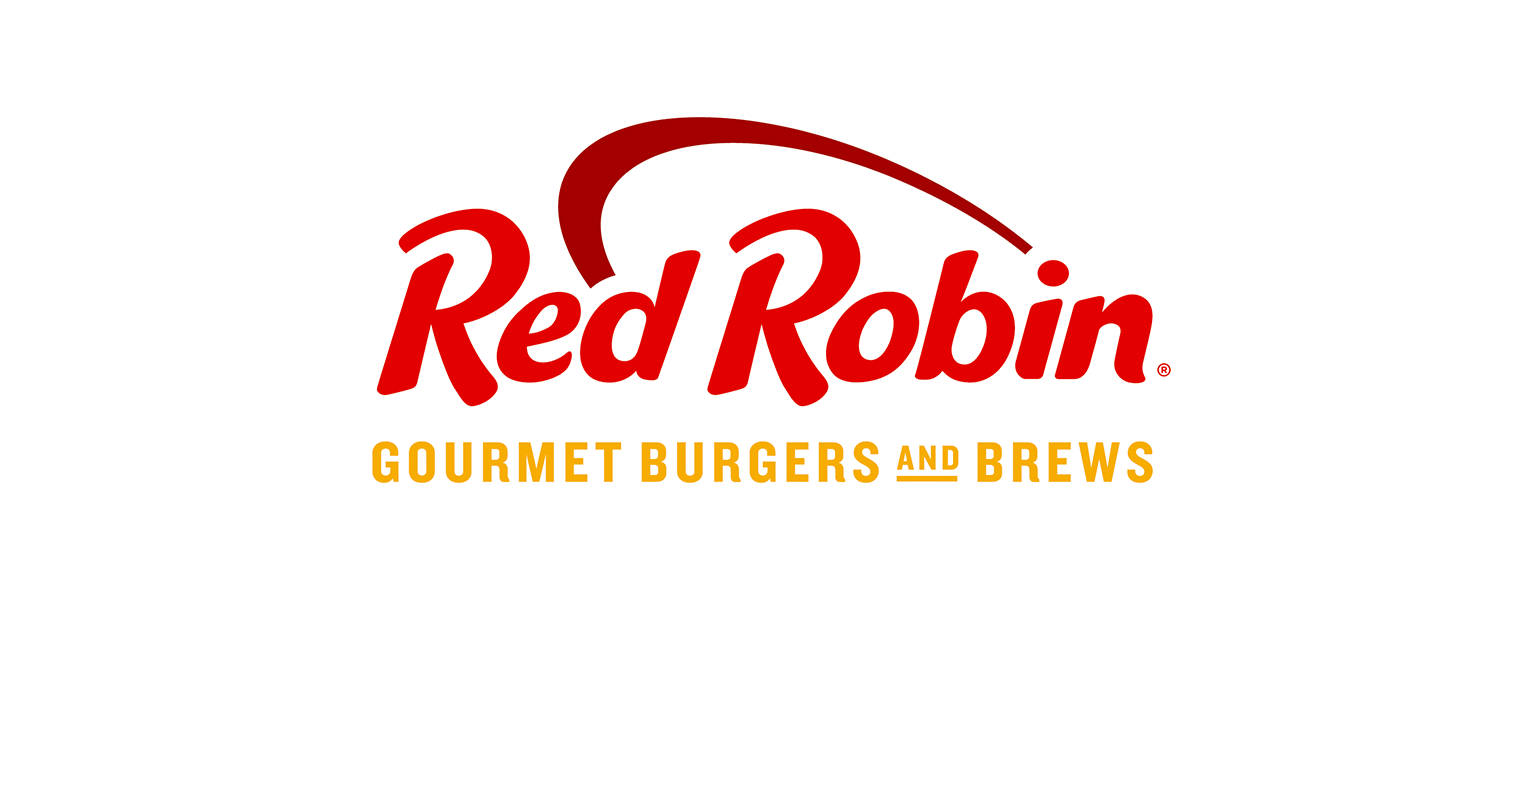 07+ Red Robin Coupon Code (Free Delivery) August 2021